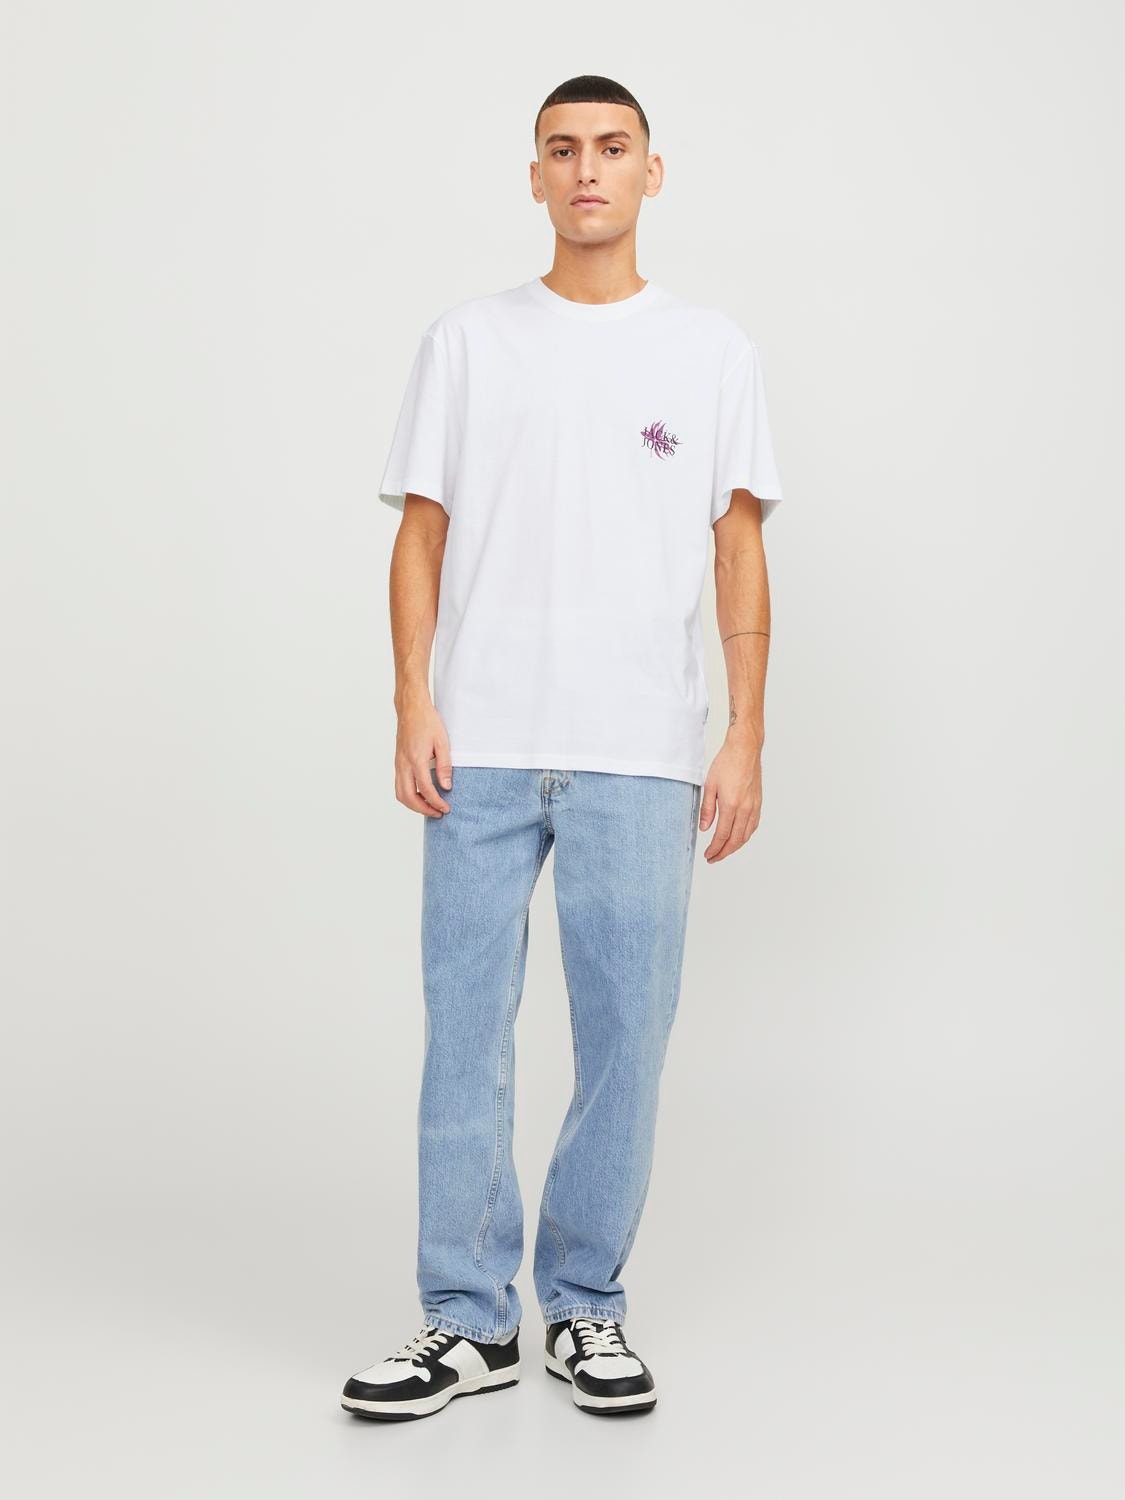 Jack & Jones Relaxed Fit Crew neck T-Shirt -Bright White - 12253602